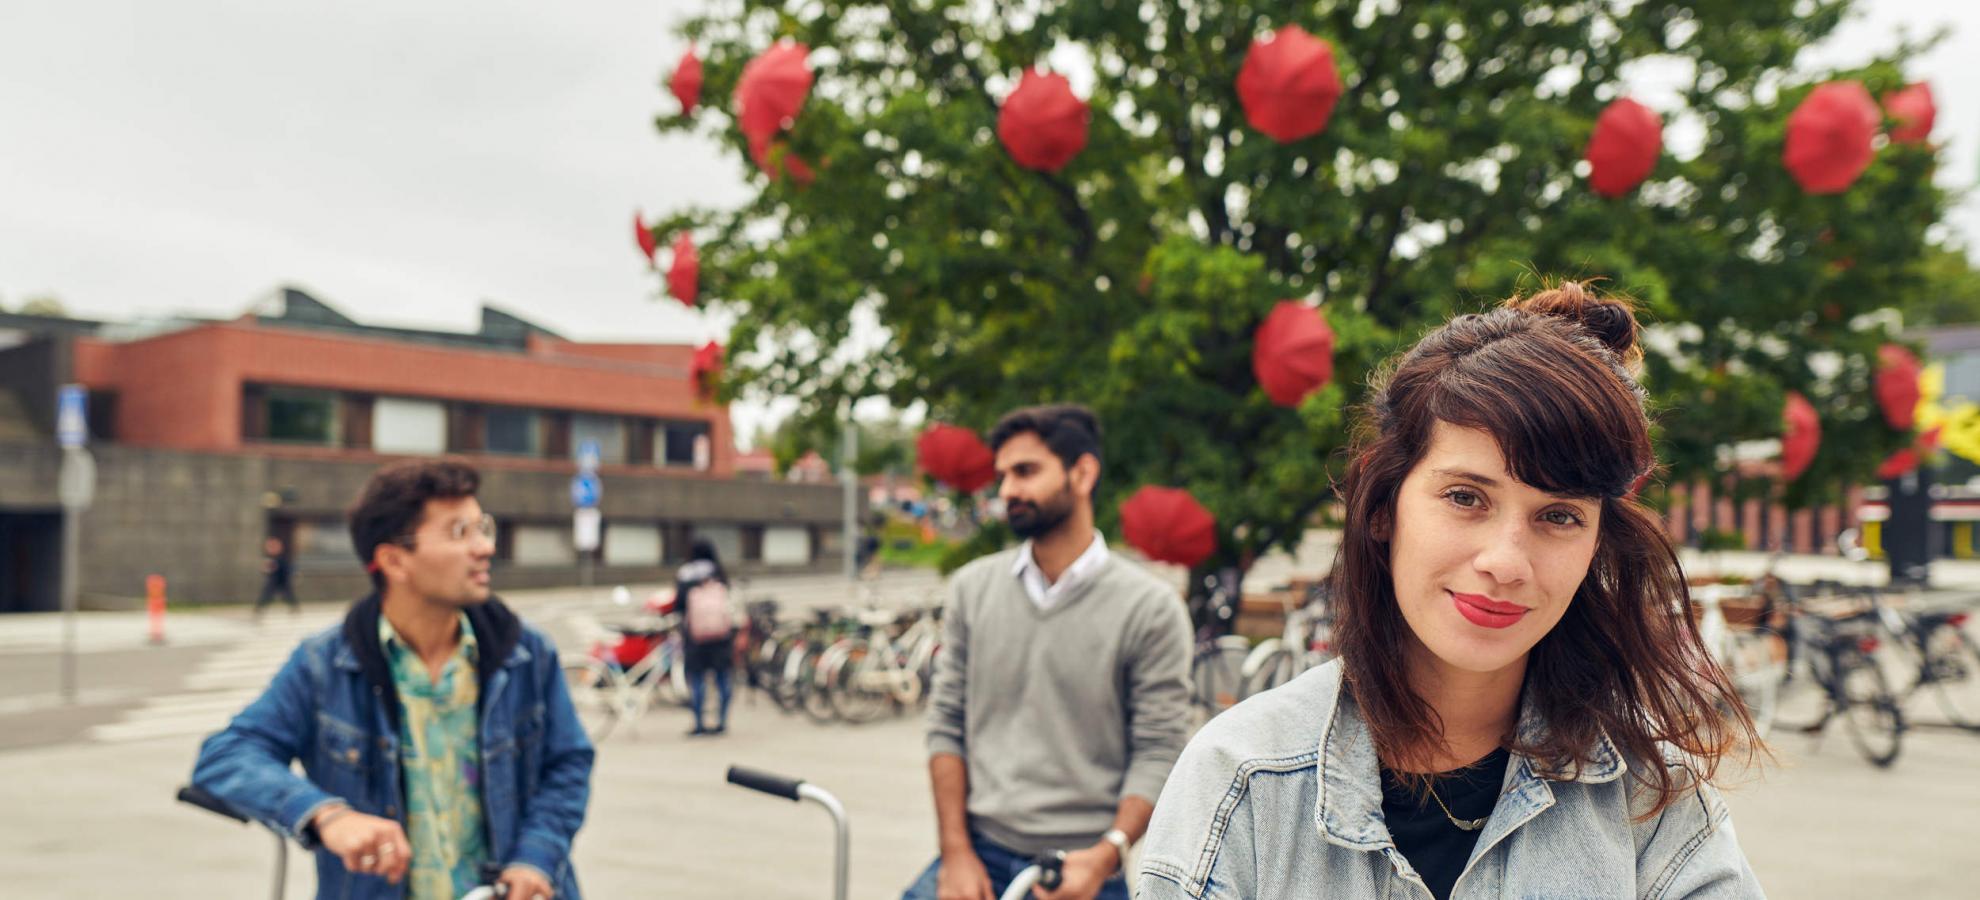 Three people are standing in front of Aalto University, a woman in the foreground looking straight at the camera, while 2 men mounted on bikes are chatting behind her. Behind them all are bike racks, a tree in full bloom dotted with red umbrellas, and the Aalto University buildings.